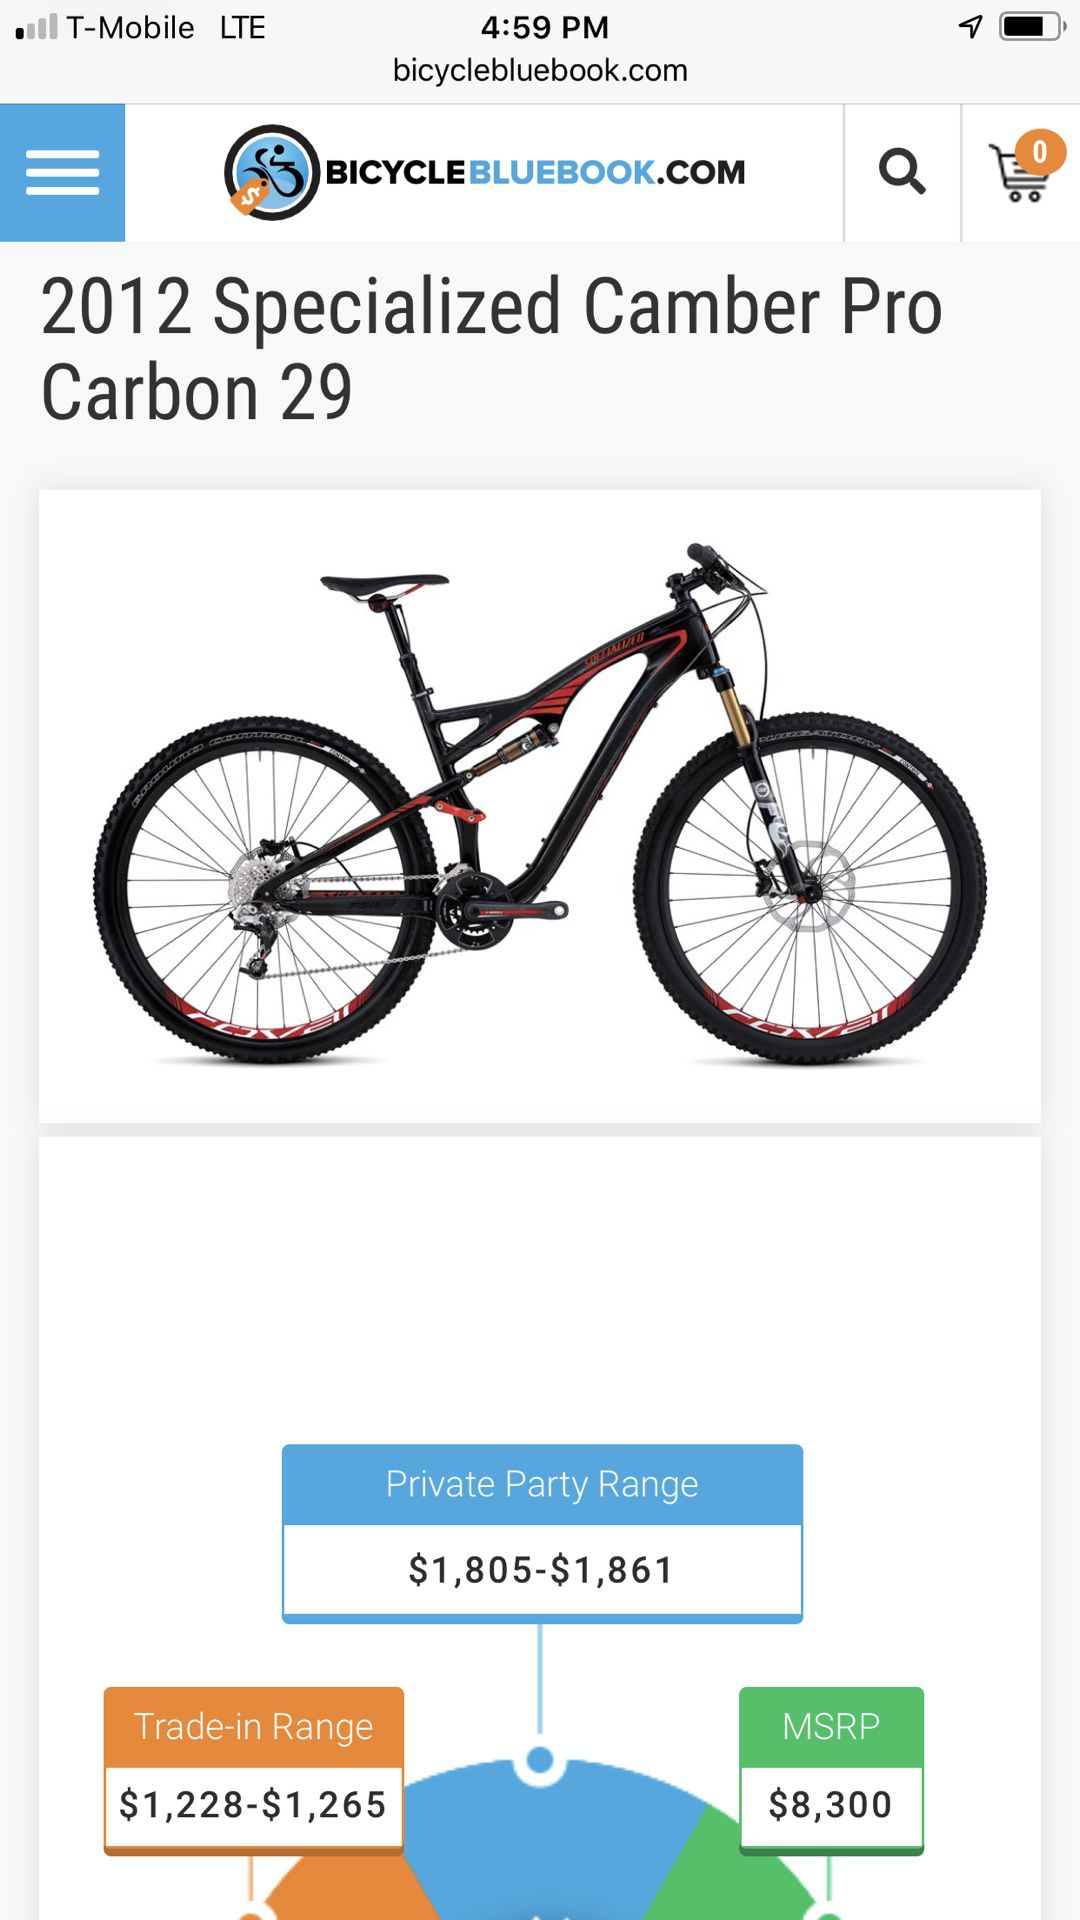 Specialized Camber Pro 29er for sale or trade